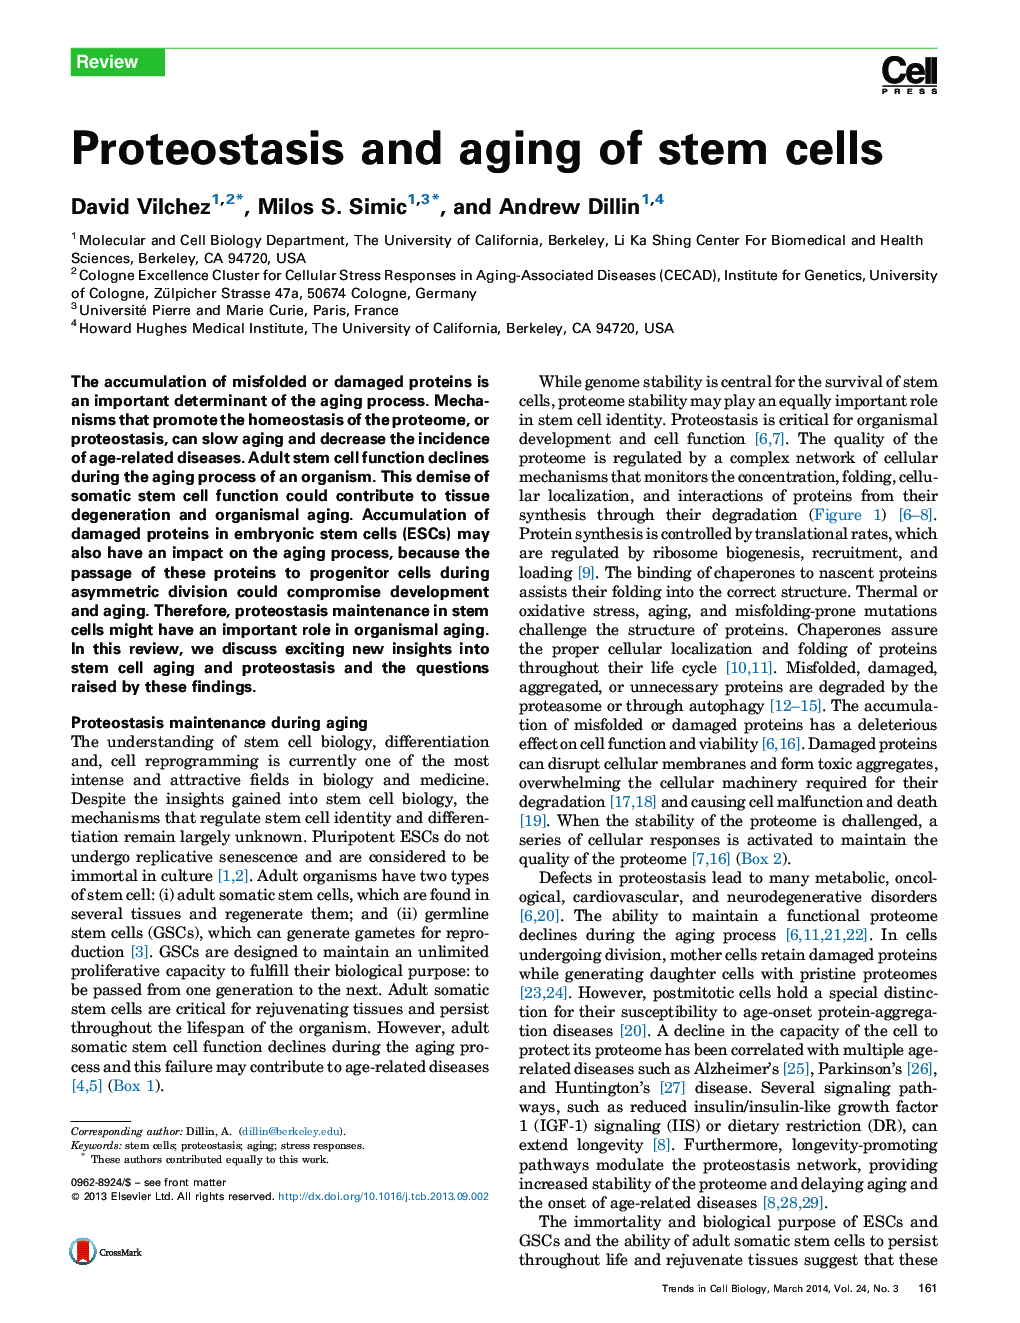 Proteostasis and aging of stem cells